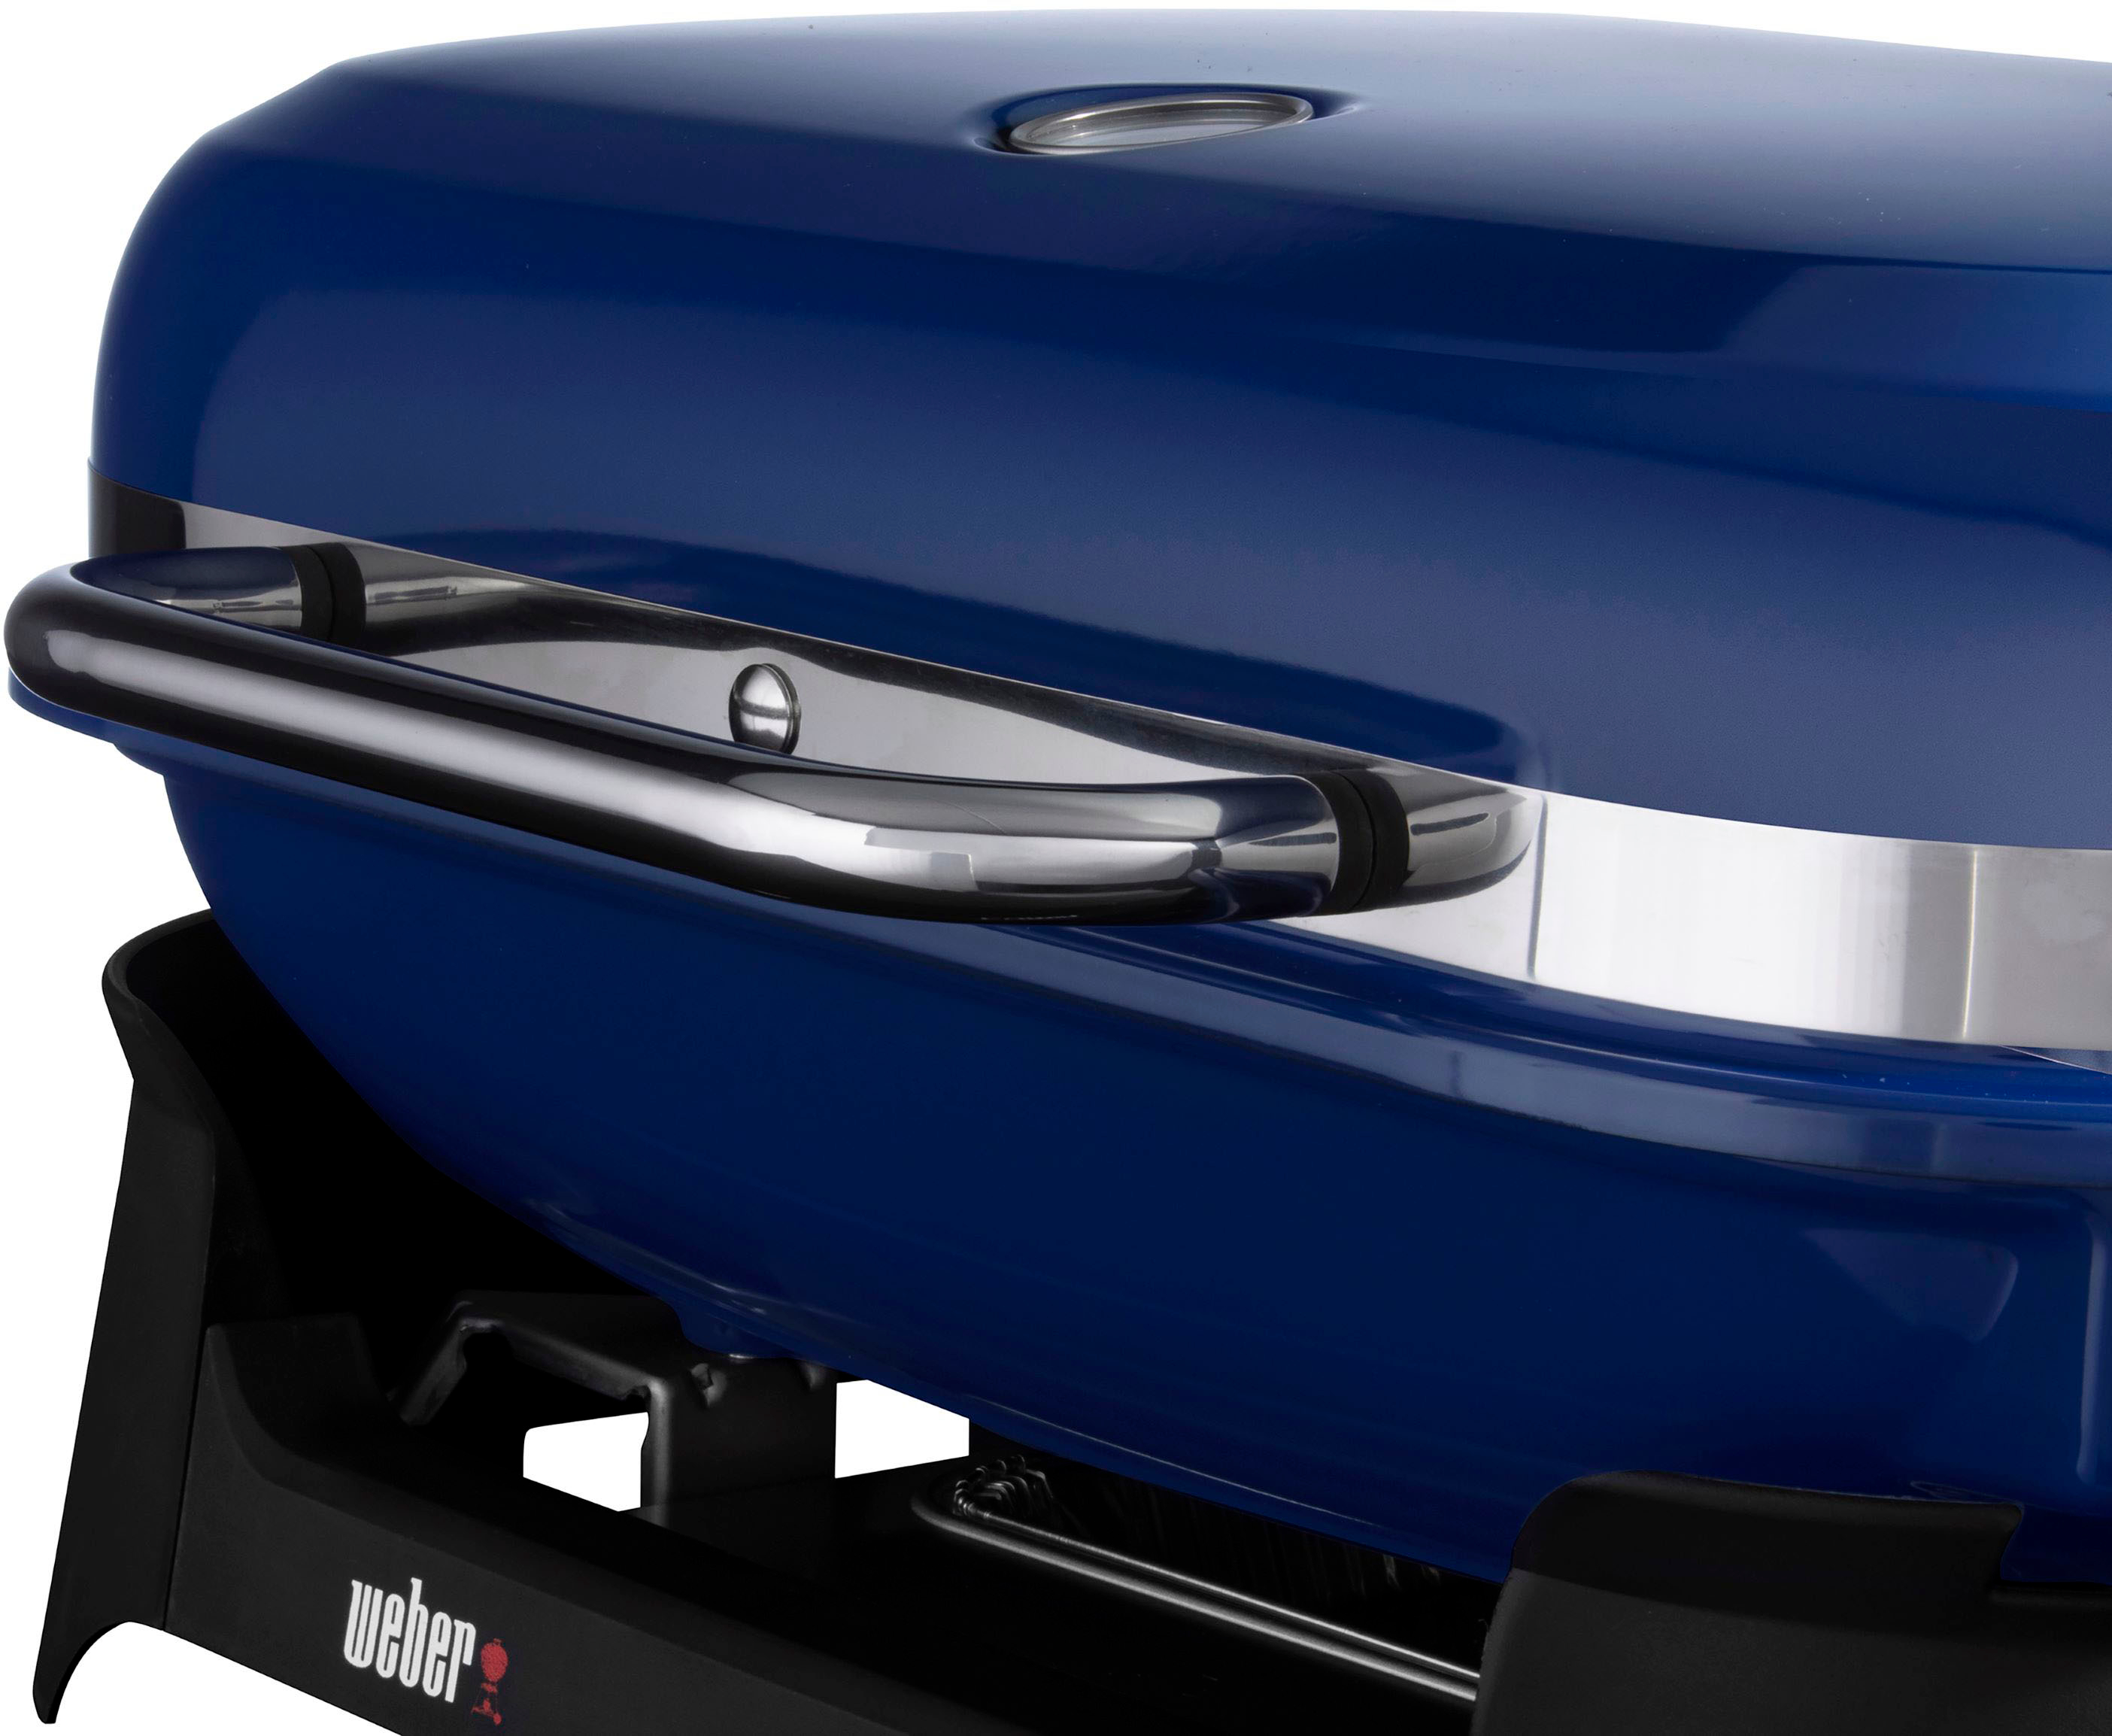 Ventray Electric Grill Set Blue